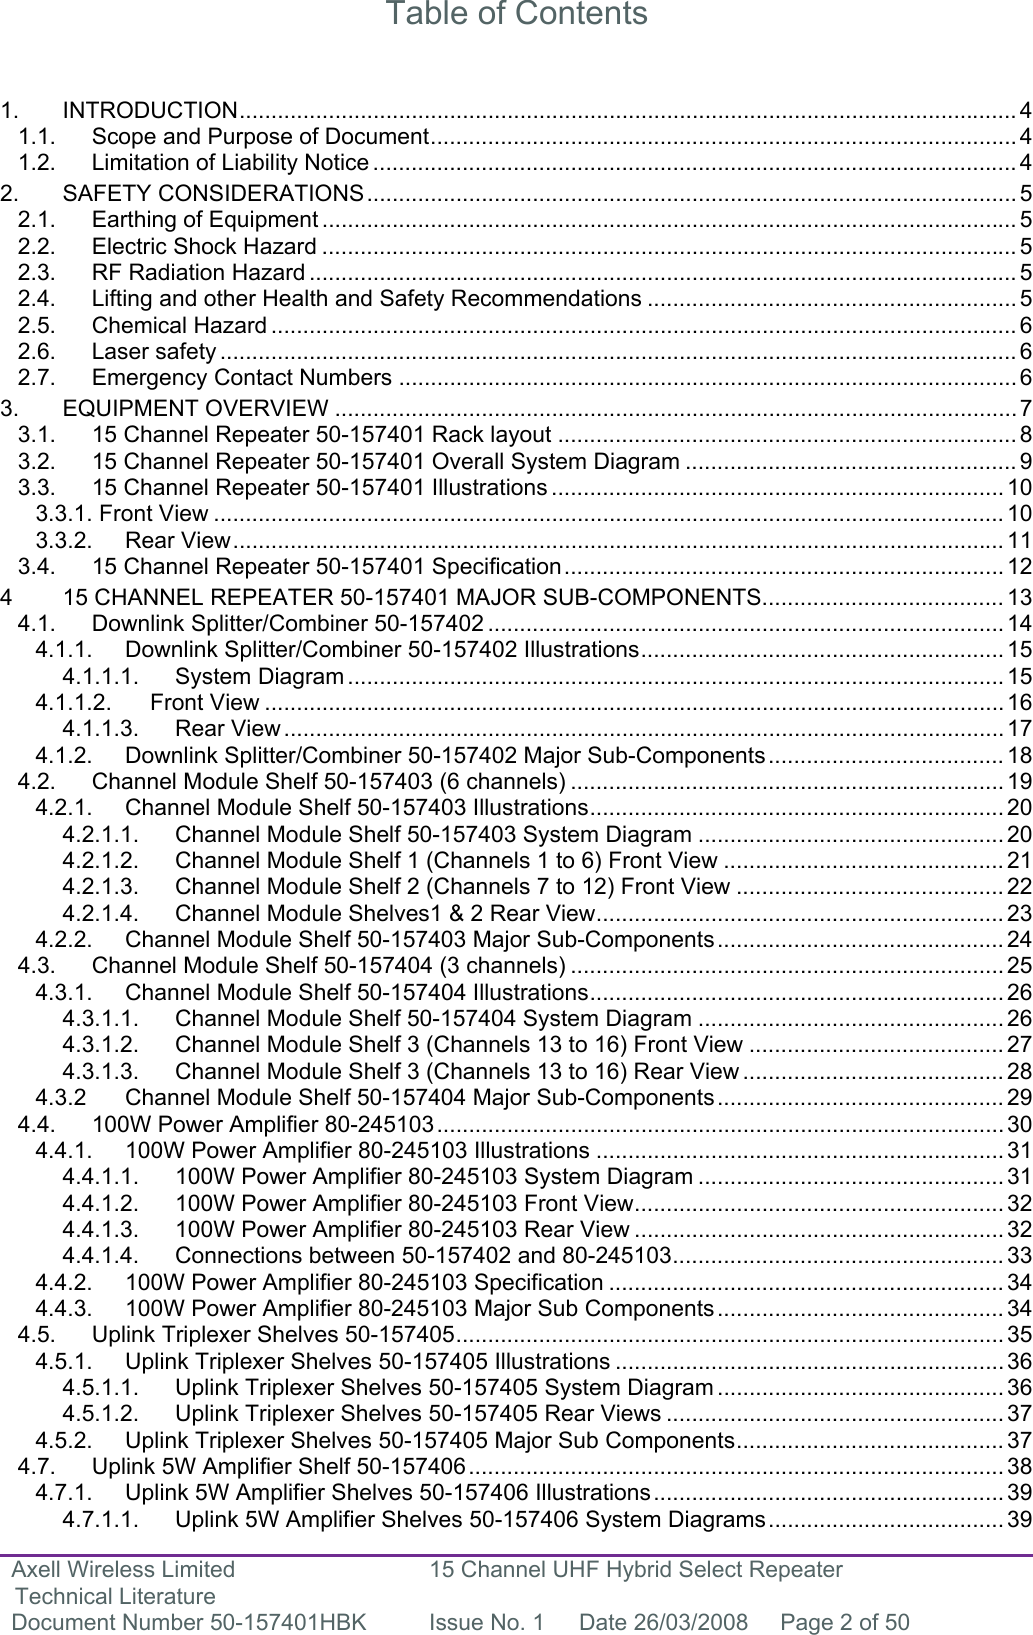 Axell Wireless Limited Technical Literature 15 Channel UHF Hybrid Select Repeater Document Number 50-157401HBK  Issue No. 1  Date 26/03/2008  Page 2 of 50   Table of Contents   1. INTRODUCTION.......................................................................................................................... 4 1.1. Scope and Purpose of Document............................................................................................ 4 1.2. Limitation of Liability Notice ..................................................................................................... 4 2. SAFETY CONSIDERATIONS...................................................................................................... 5 2.1. Earthing of Equipment ............................................................................................................. 5 2.2. Electric Shock Hazard ............................................................................................................. 5 2.3. RF Radiation Hazard ............................................................................................................... 5 2.4. Lifting and other Health and Safety Recommendations .......................................................... 5 2.5. Chemical Hazard ..................................................................................................................... 6 2.6. Laser safety ............................................................................................................................. 6 2.7. Emergency Contact Numbers .................................................................................................6 3. EQUIPMENT OVERVIEW ...........................................................................................................7 3.1. 15 Channel Repeater 50-157401 Rack layout ........................................................................8 3.2. 15 Channel Repeater 50-157401 Overall System Diagram .................................................... 9 3.3. 15 Channel Repeater 50-157401 Illustrations ....................................................................... 10 3.3.1. Front View ............................................................................................................................ 10 3.3.2. Rear View.........................................................................................................................11 3.4. 15 Channel Repeater 50-157401 Specification.....................................................................12 4 15 CHANNEL REPEATER 50-157401 MAJOR SUB-COMPONENTS...................................... 13 4.1. Downlink Splitter/Combiner 50-157402 ................................................................................. 14 4.1.1. Downlink Splitter/Combiner 50-157402 Illustrations......................................................... 15 4.1.1.1. System Diagram .......................................................................................................15 4.1.1.2. Front View .................................................................................................................... 16 4.1.1.3. Rear View .................................................................................................................17 4.1.2. Downlink Splitter/Combiner 50-157402 Major Sub-Components..................................... 18 4.2. Channel Module Shelf 50-157403 (6 channels) .................................................................... 19 4.2.1. Channel Module Shelf 50-157403 Illustrations................................................................. 20 4.2.1.1. Channel Module Shelf 50-157403 System Diagram ................................................ 20 4.2.1.2. Channel Module Shelf 1 (Channels 1 to 6) Front View ............................................ 21 4.2.1.3. Channel Module Shelf 2 (Channels 7 to 12) Front View .......................................... 22 4.2.1.4. Channel Module Shelves1 &amp; 2 Rear View................................................................ 23 4.2.2. Channel Module Shelf 50-157403 Major Sub-Components............................................. 24 4.3. Channel Module Shelf 50-157404 (3 channels) .................................................................... 25 4.3.1. Channel Module Shelf 50-157404 Illustrations................................................................. 26 4.3.1.1. Channel Module Shelf 50-157404 System Diagram ................................................ 26 4.3.1.2. Channel Module Shelf 3 (Channels 13 to 16) Front View ........................................ 27 4.3.1.3. Channel Module Shelf 3 (Channels 13 to 16) Rear View ......................................... 28 4.3.2 Channel Module Shelf 50-157404 Major Sub-Components............................................. 29 4.4. 100W Power Amplifier 80-245103.........................................................................................30 4.4.1. 100W Power Amplifier 80-245103 Illustrations ................................................................31 4.4.1.1. 100W Power Amplifier 80-245103 System Diagram ................................................ 31 4.4.1.2. 100W Power Amplifier 80-245103 Front View.......................................................... 32 4.4.1.3. 100W Power Amplifier 80-245103 Rear View .......................................................... 32 4.4.1.4. Connections between 50-157402 and 80-245103.................................................... 33 4.4.2. 100W Power Amplifier 80-245103 Specification .............................................................. 34 4.4.3. 100W Power Amplifier 80-245103 Major Sub Components............................................. 34 4.5. Uplink Triplexer Shelves 50-157405...................................................................................... 35 4.5.1. Uplink Triplexer Shelves 50-157405 Illustrations ............................................................. 36 4.5.1.1. Uplink Triplexer Shelves 50-157405 System Diagram ............................................. 36 4.5.1.2. Uplink Triplexer Shelves 50-157405 Rear Views ..................................................... 37 4.5.2. Uplink Triplexer Shelves 50-157405 Major Sub Components.......................................... 37 4.7. Uplink 5W Amplifier Shelf 50-157406.................................................................................... 38 4.7.1. Uplink 5W Amplifier Shelves 50-157406 Illustrations.......................................................39 4.7.1.1. Uplink 5W Amplifier Shelves 50-157406 System Diagrams..................................... 39 